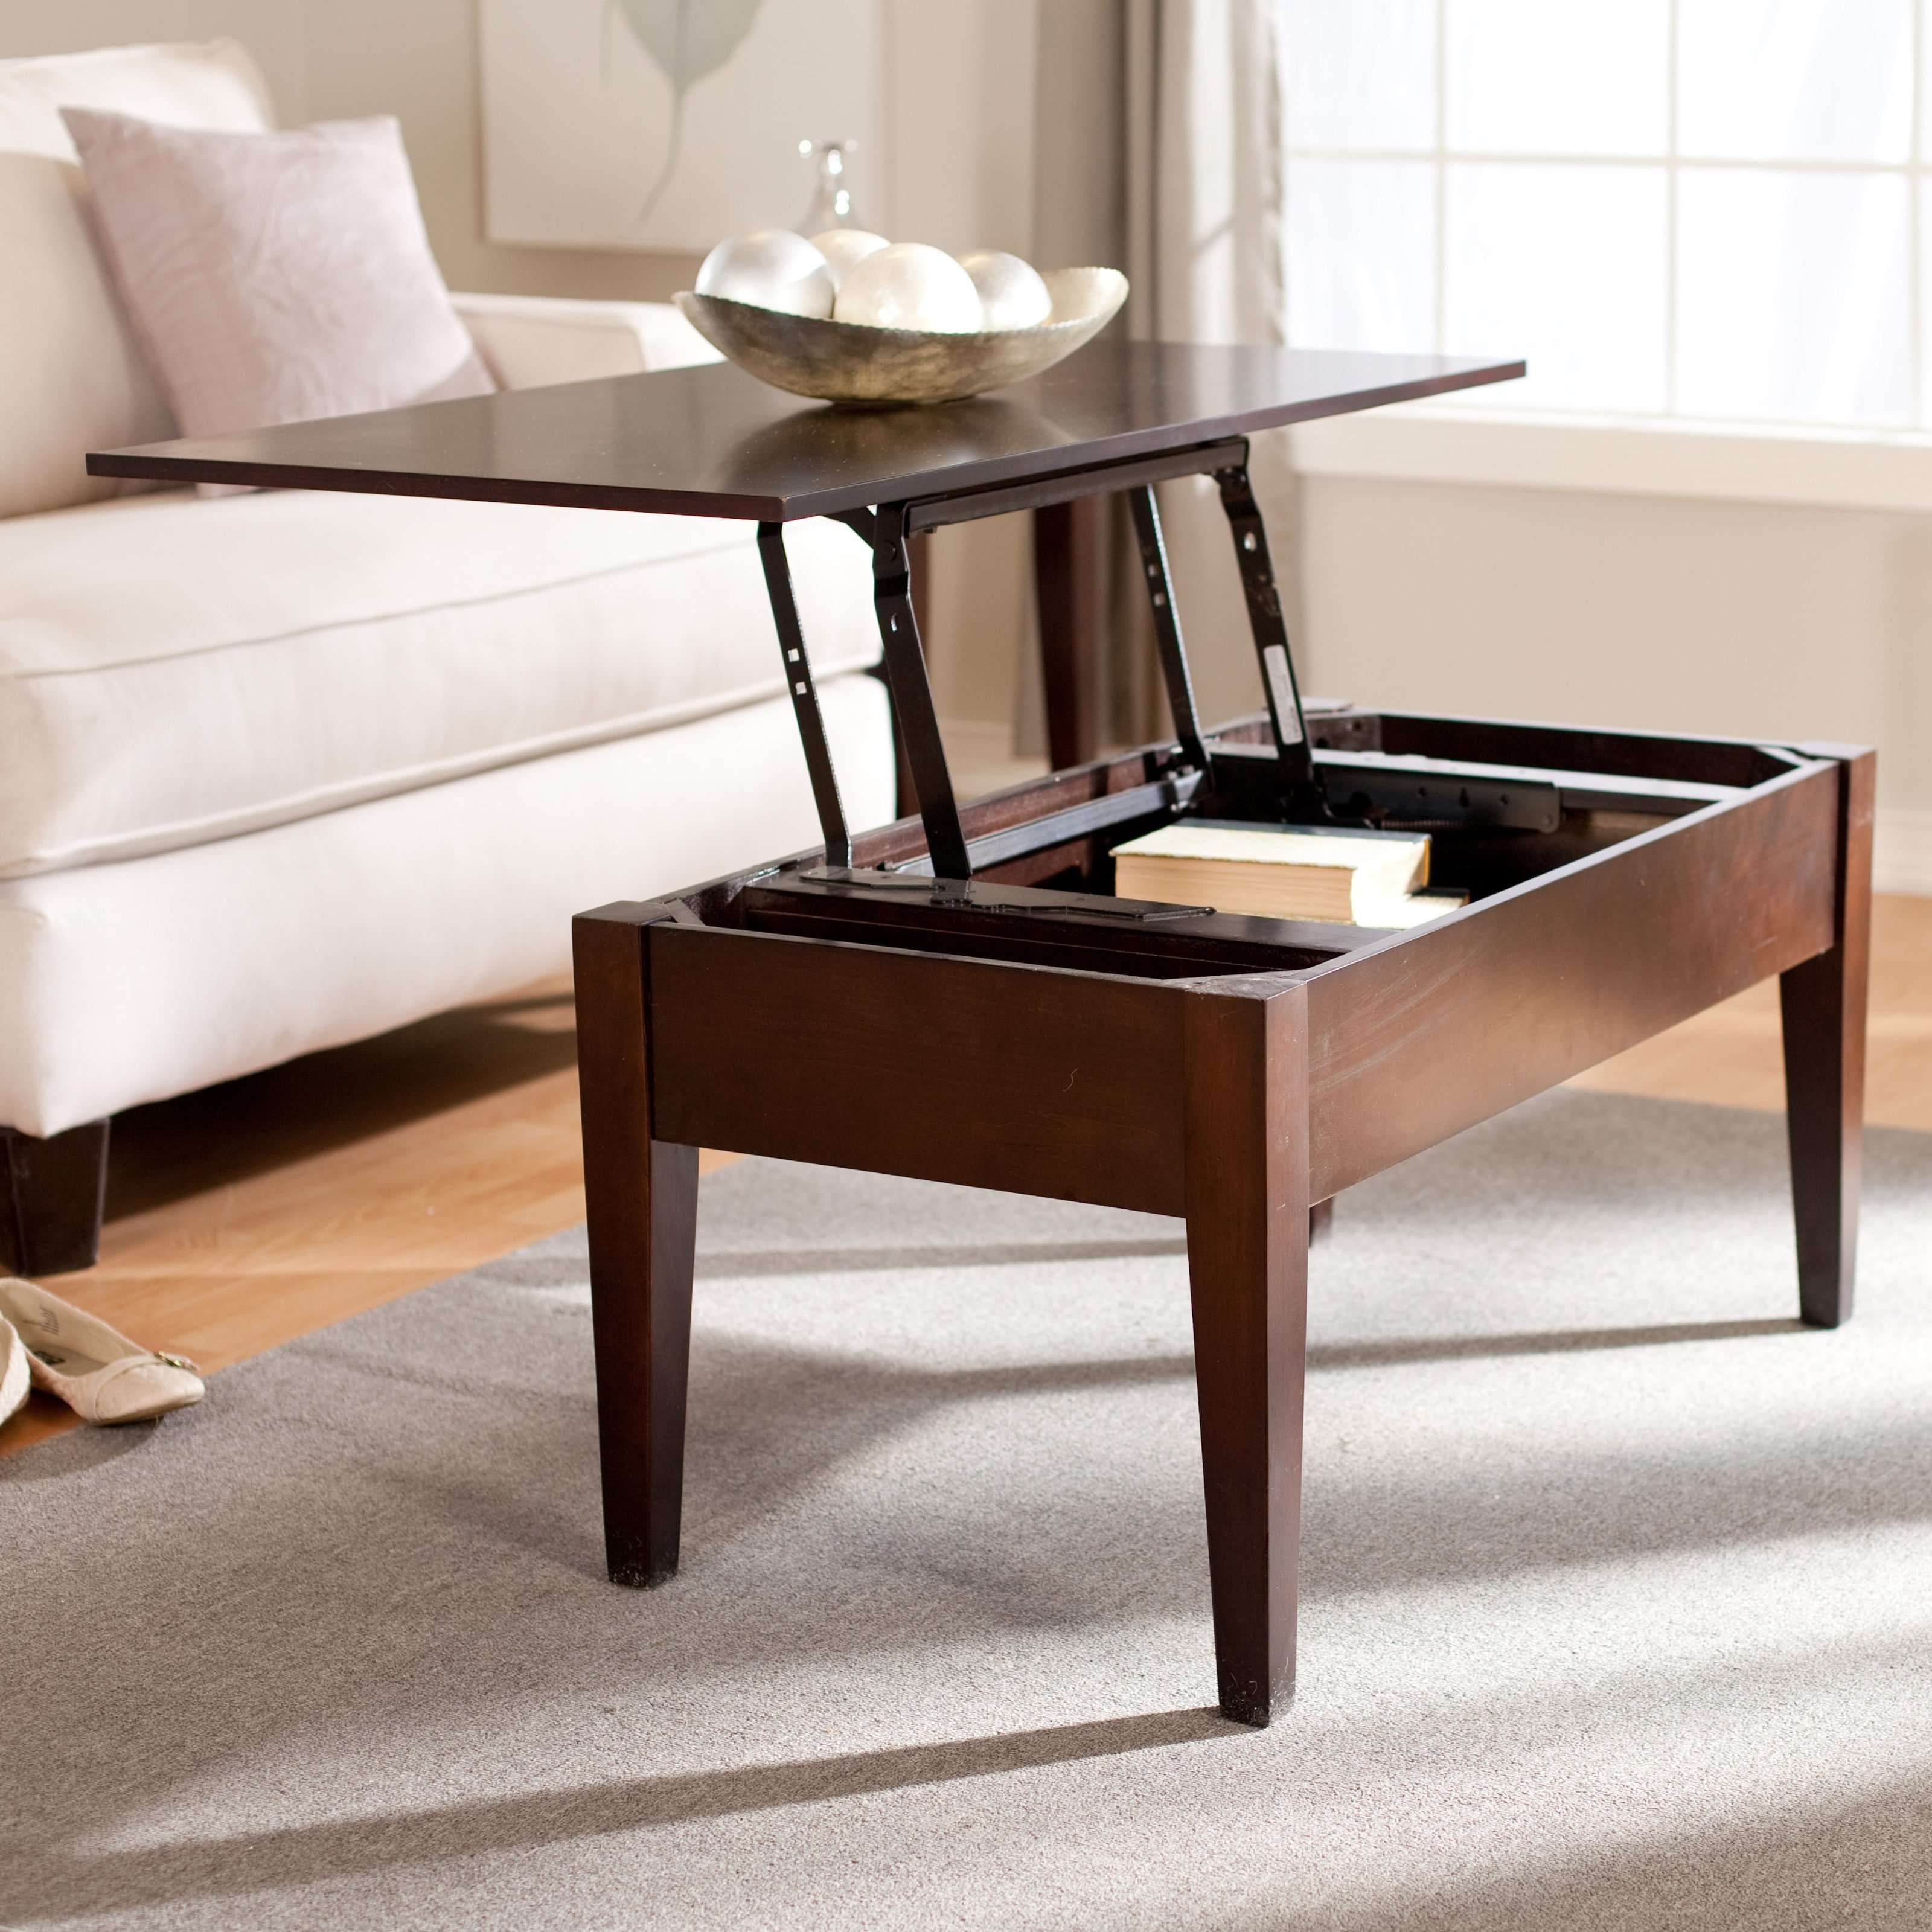 Turner Lift Top Coffee Table – Espresso (View 7 of 20)